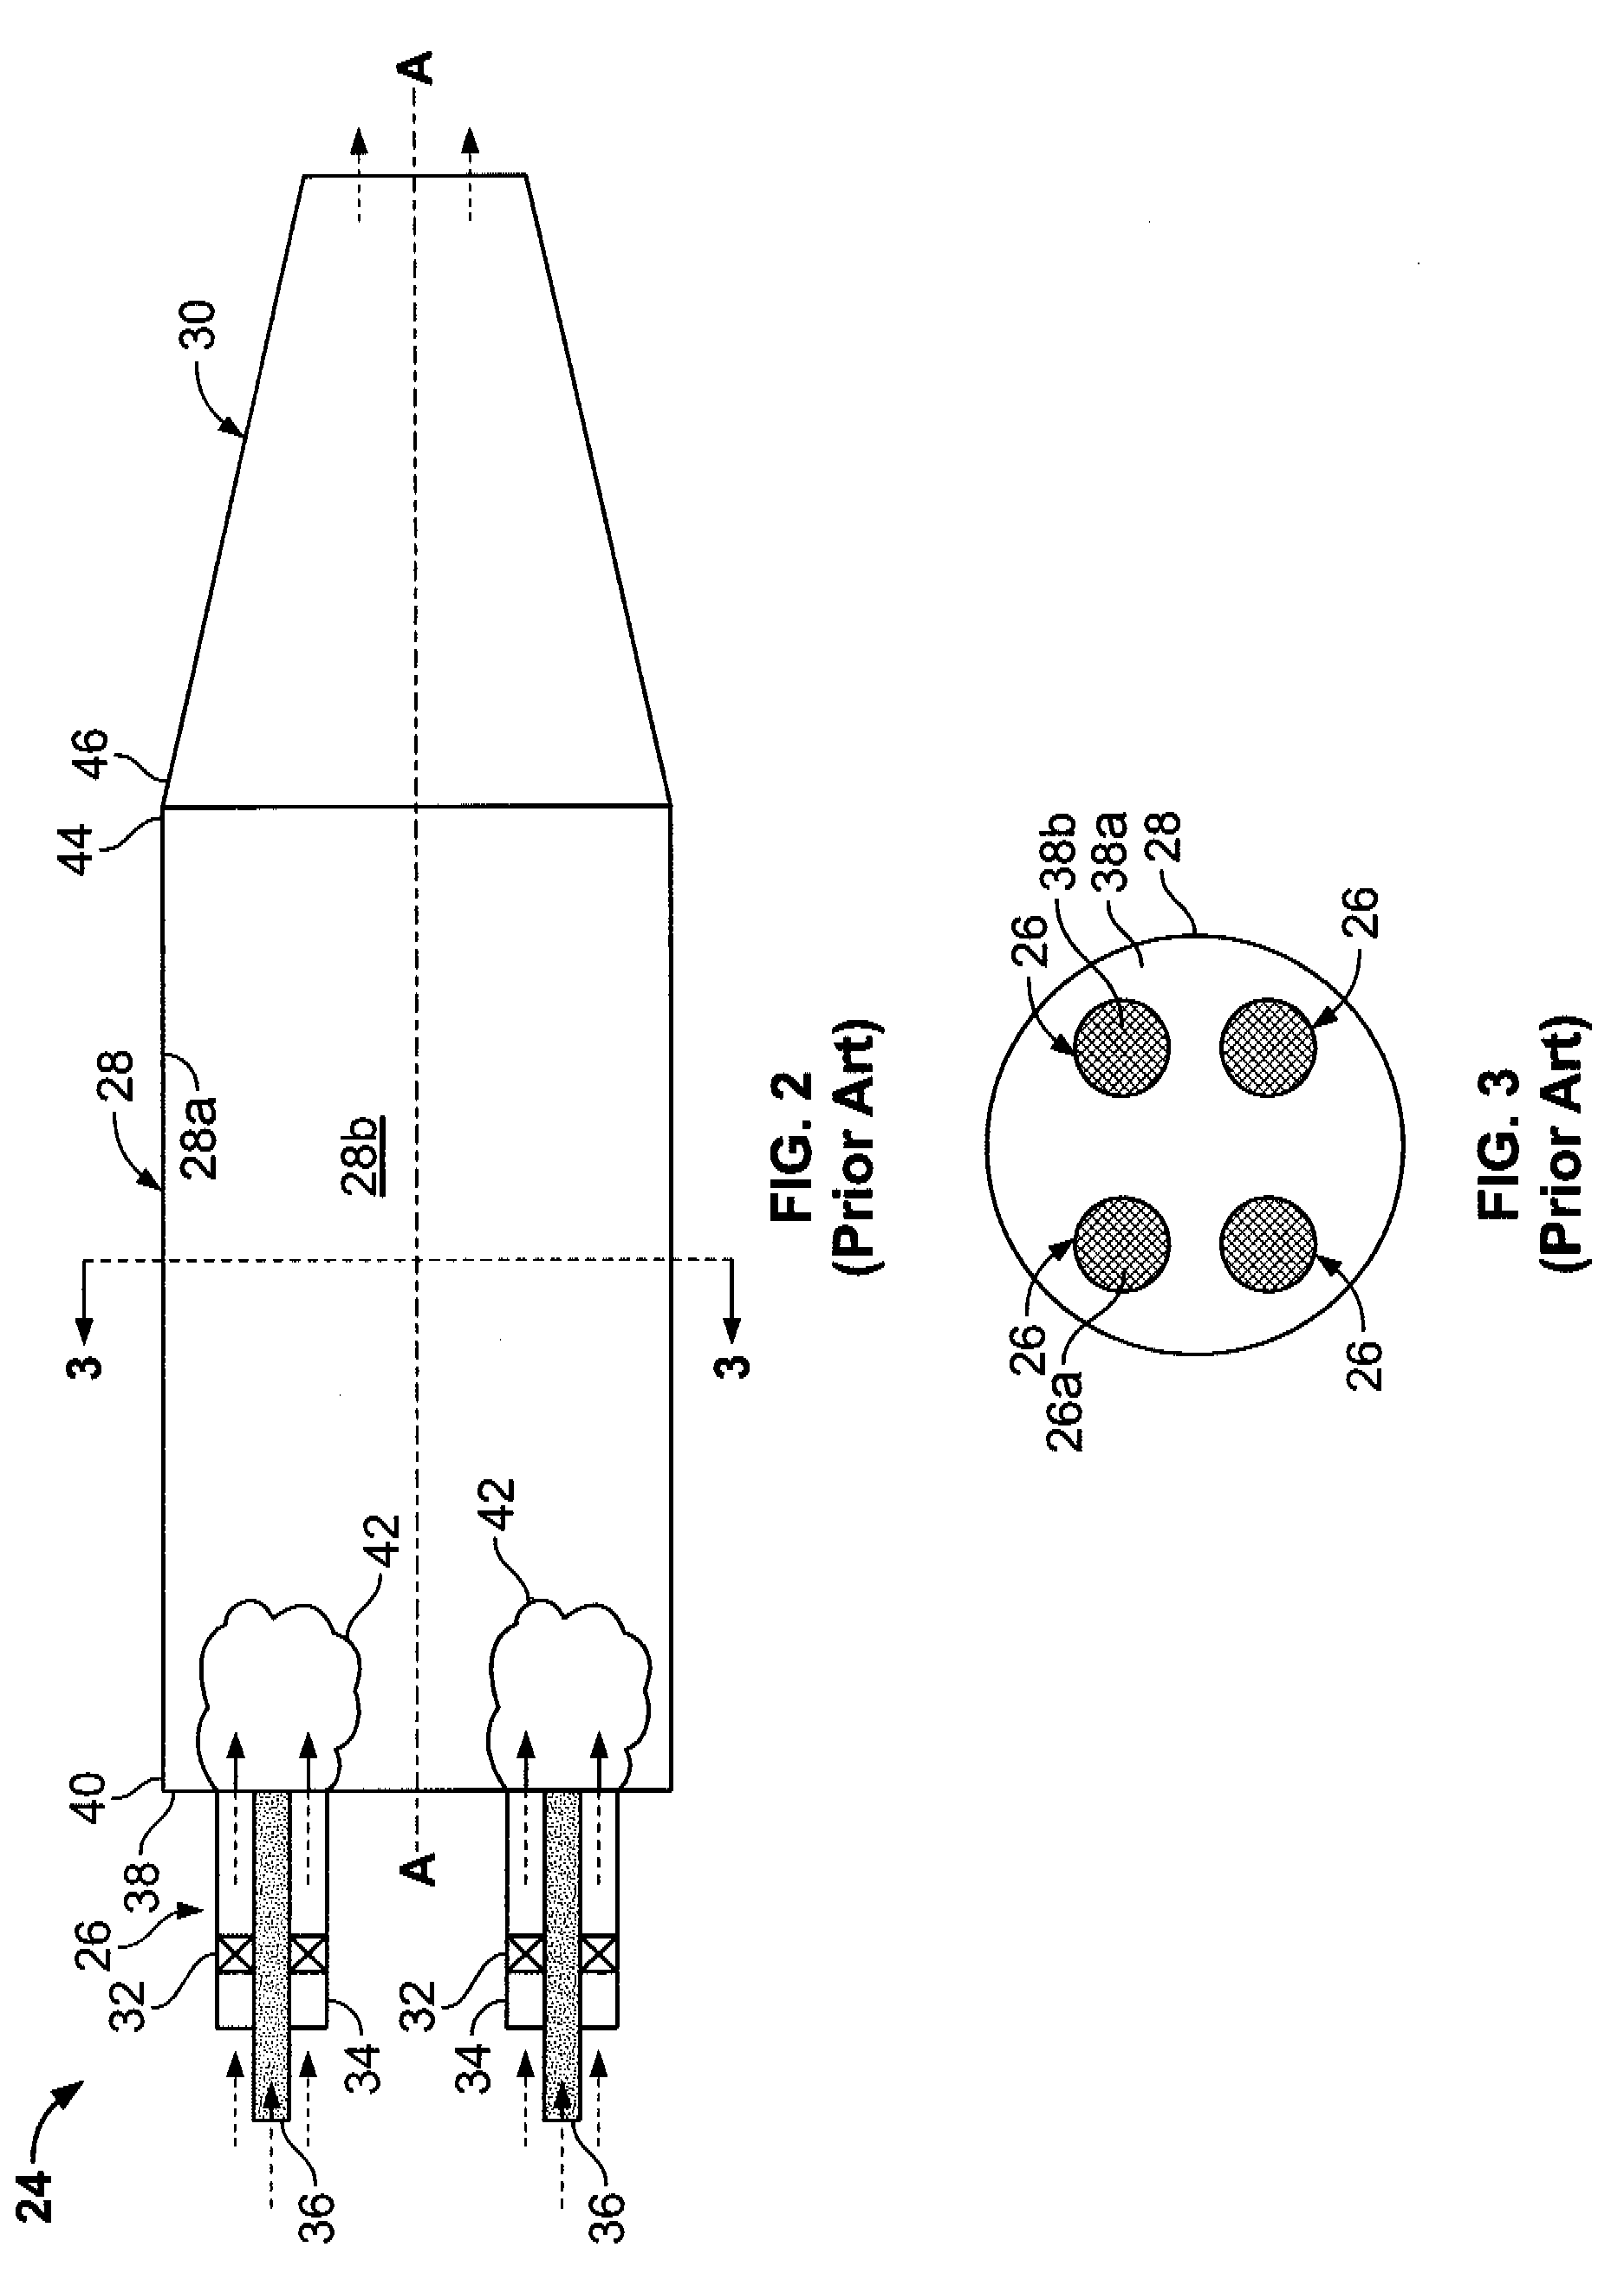 METHODS AND SYSTEMS TO FACILITATE REDUCING NOx EMISSIONS IN COMBUSTION SYSTEMS